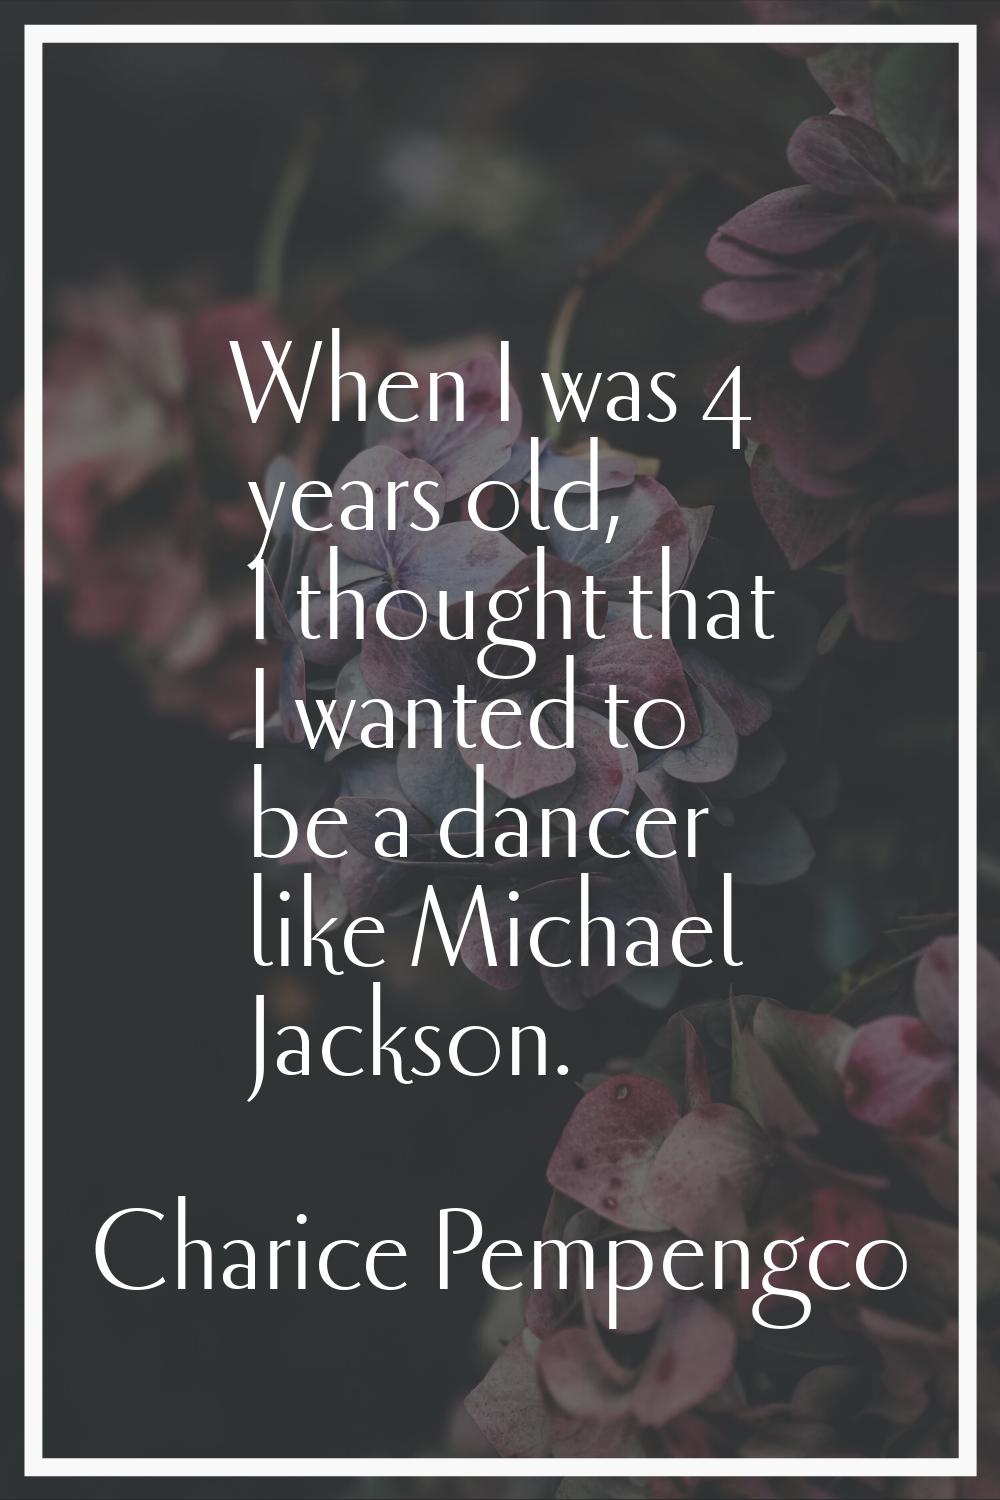 When I was 4 years old, I thought that I wanted to be a dancer like Michael Jackson.